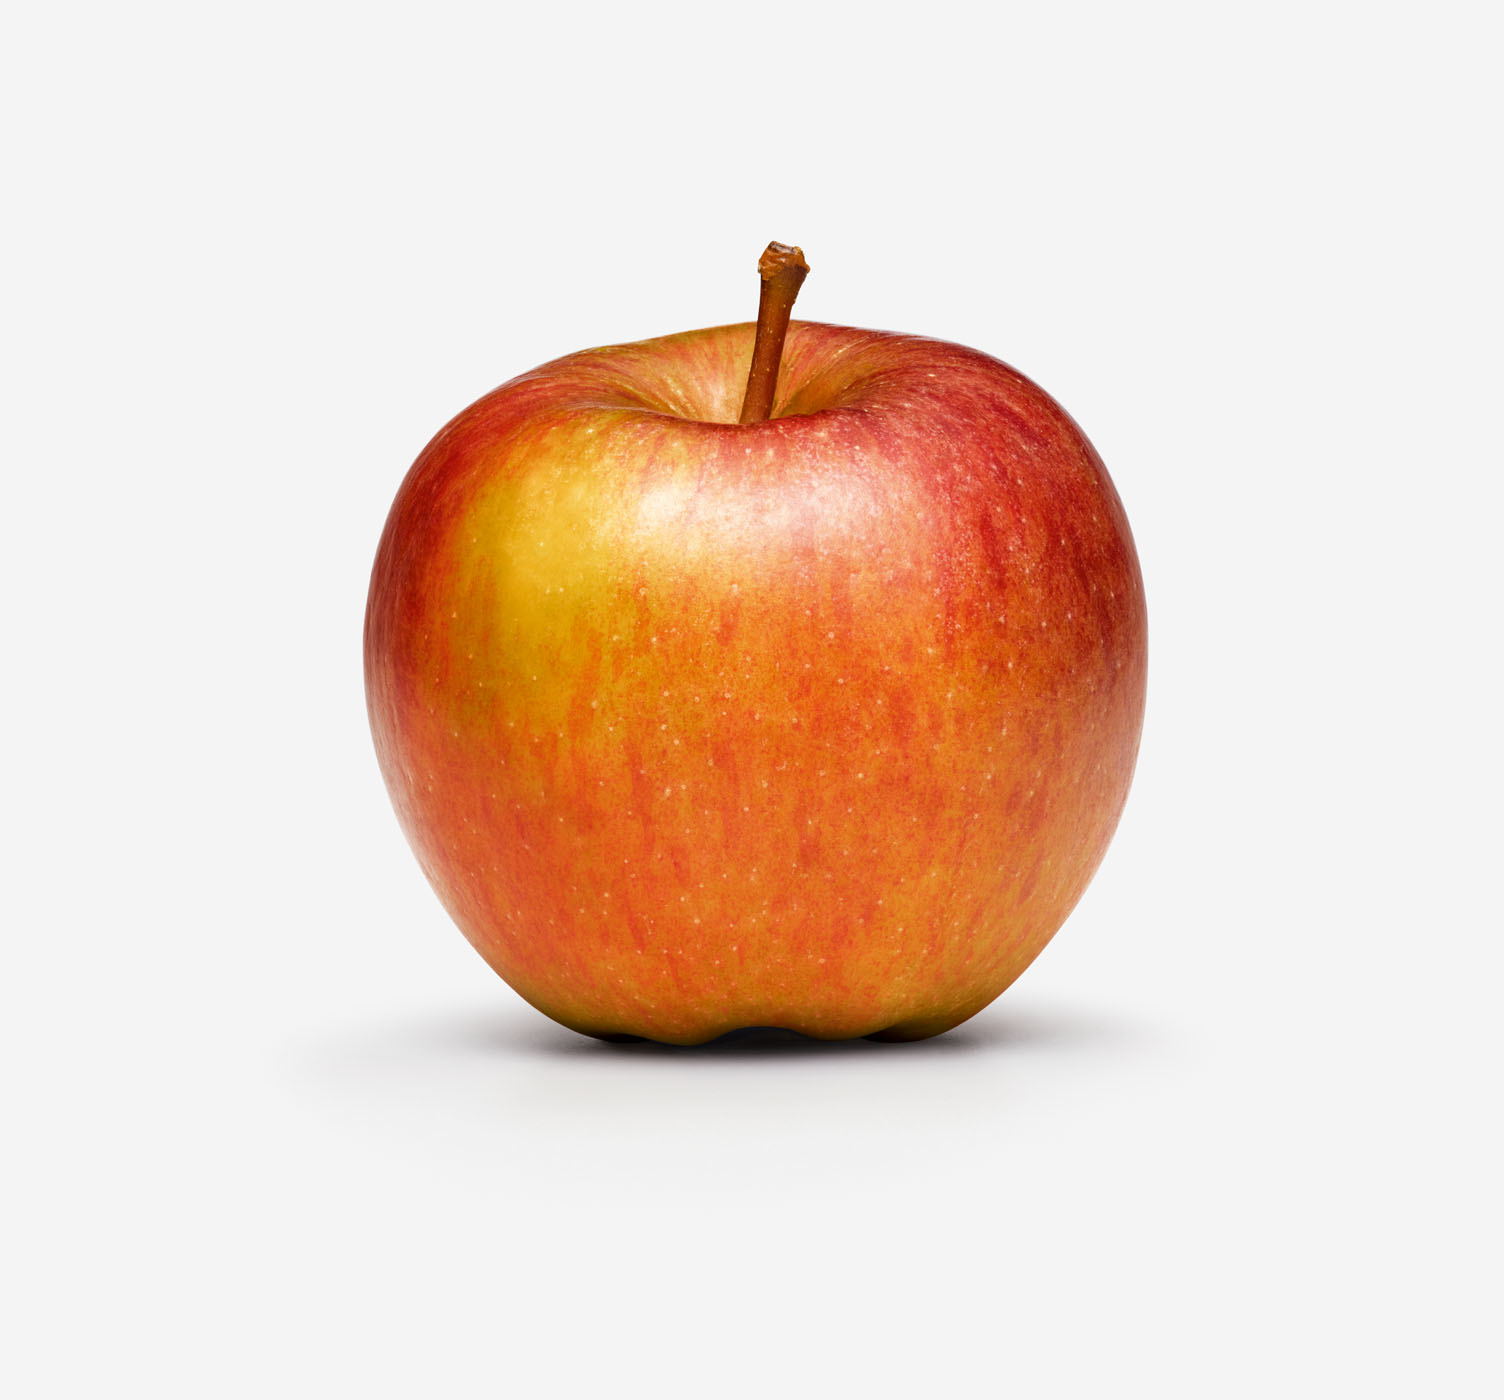 Apple on studio background by Alexander Kent London based still life and product photographer.